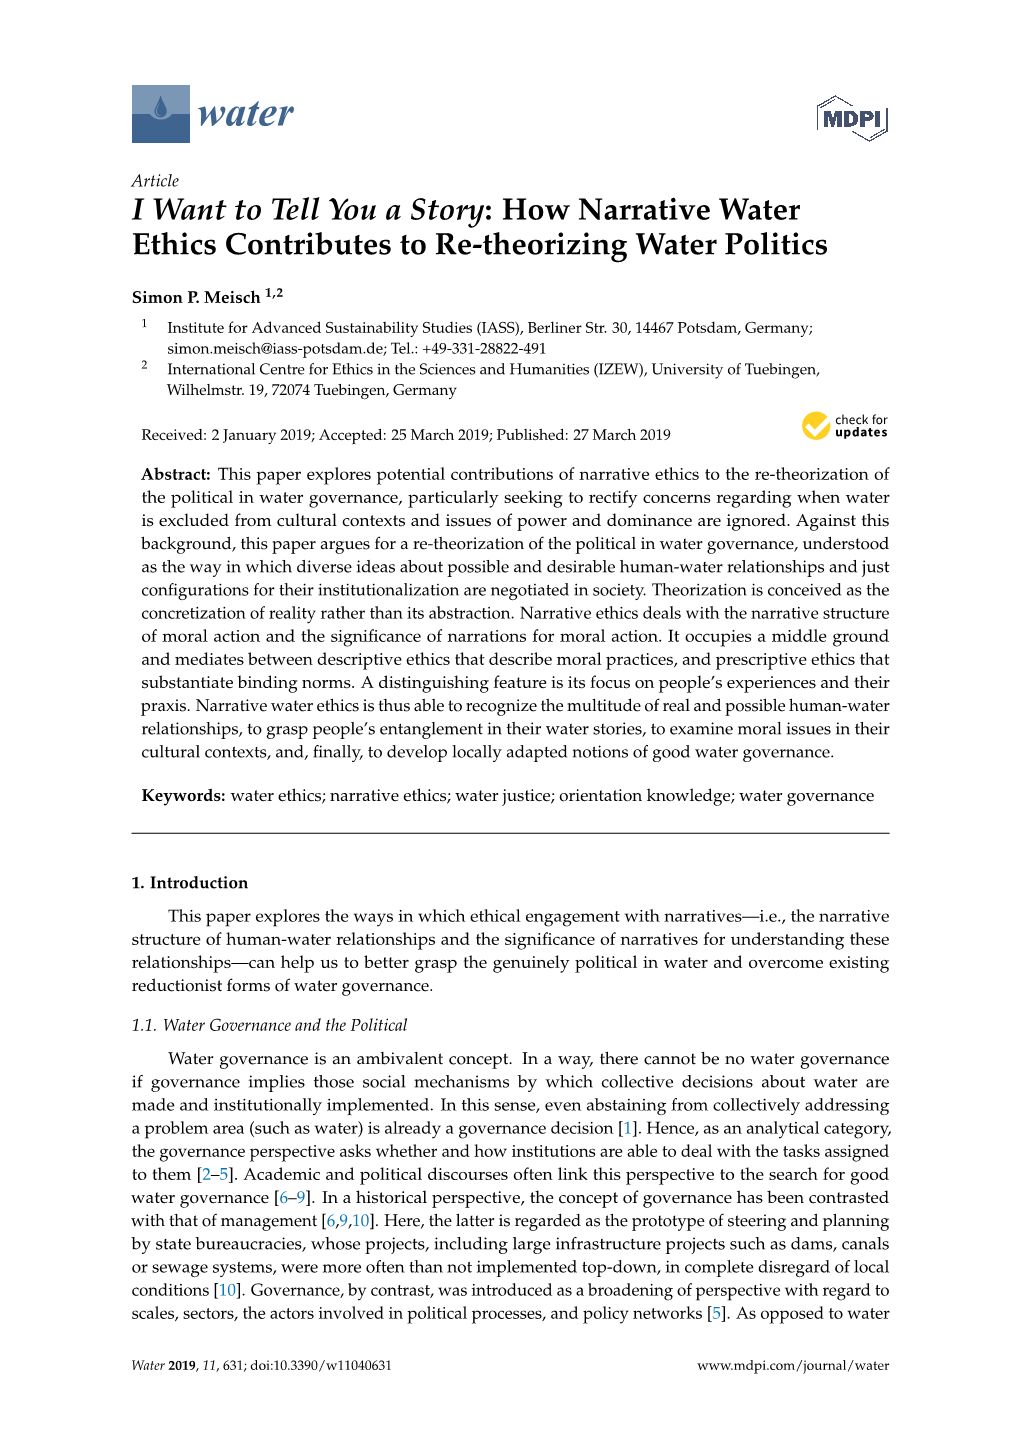 How Narrative Water Ethics Contributes to Re-Theorizing Water Politics